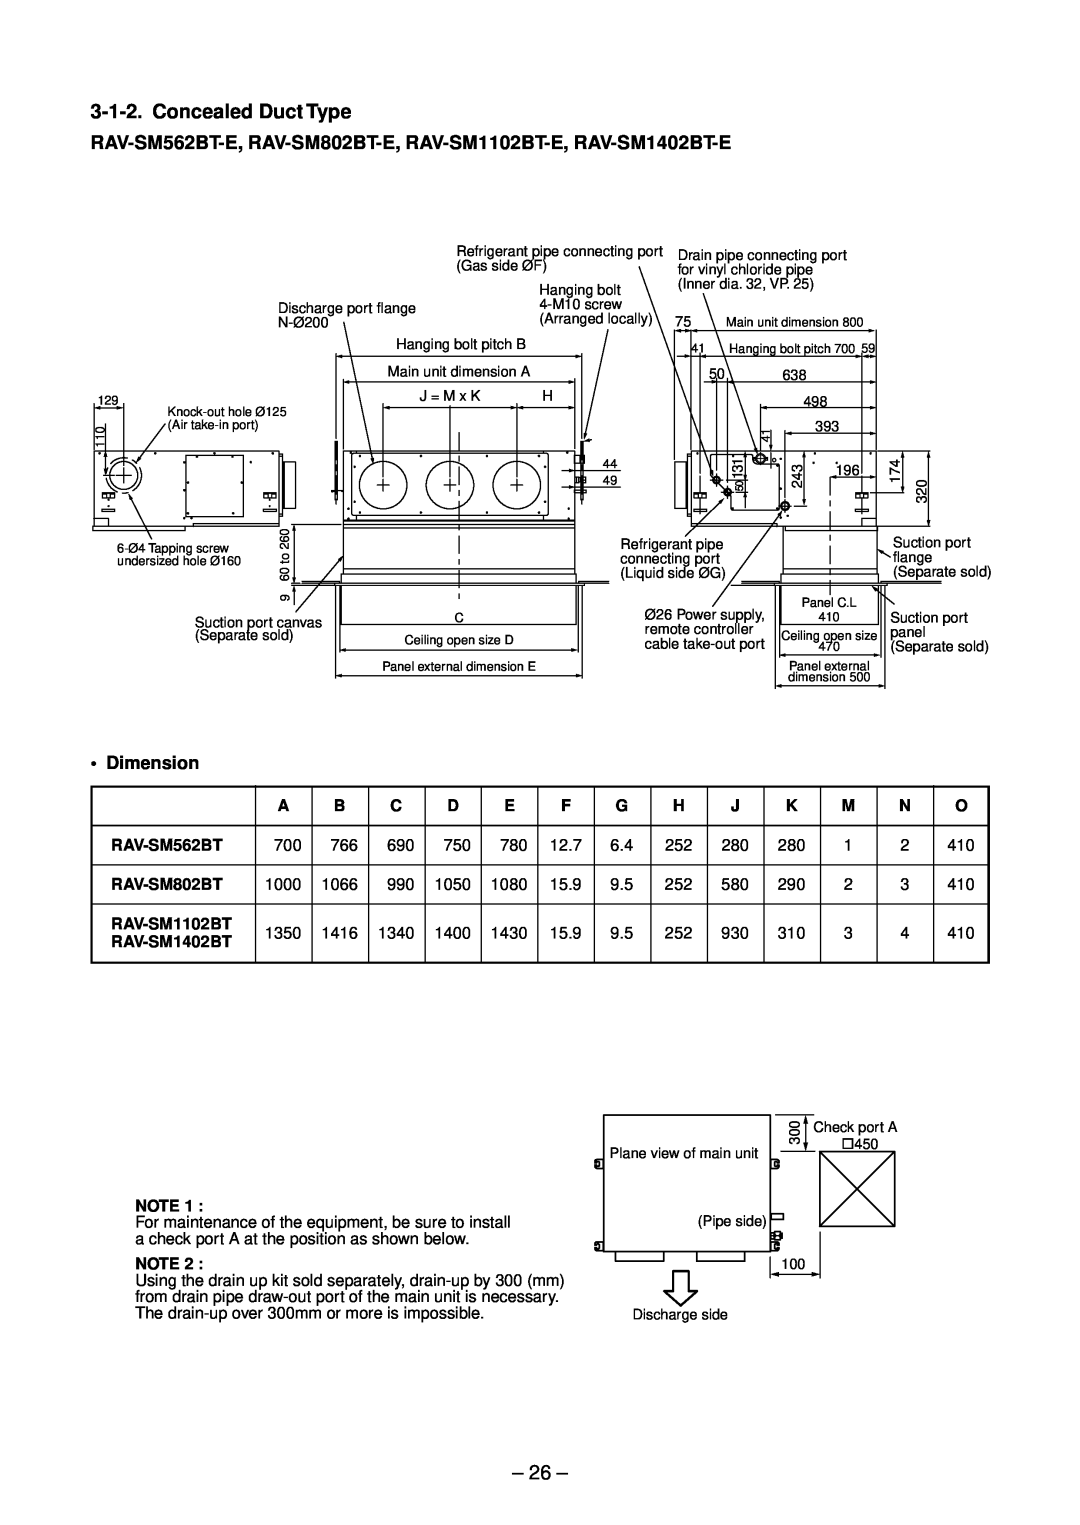 Toshiba RAV-SM802UT-E, RAV-SM1102UT-E, RAV-SM1402UT-E, RAV-SM562UT-E service manual Concealed Duct Type, 26, • Dimension 